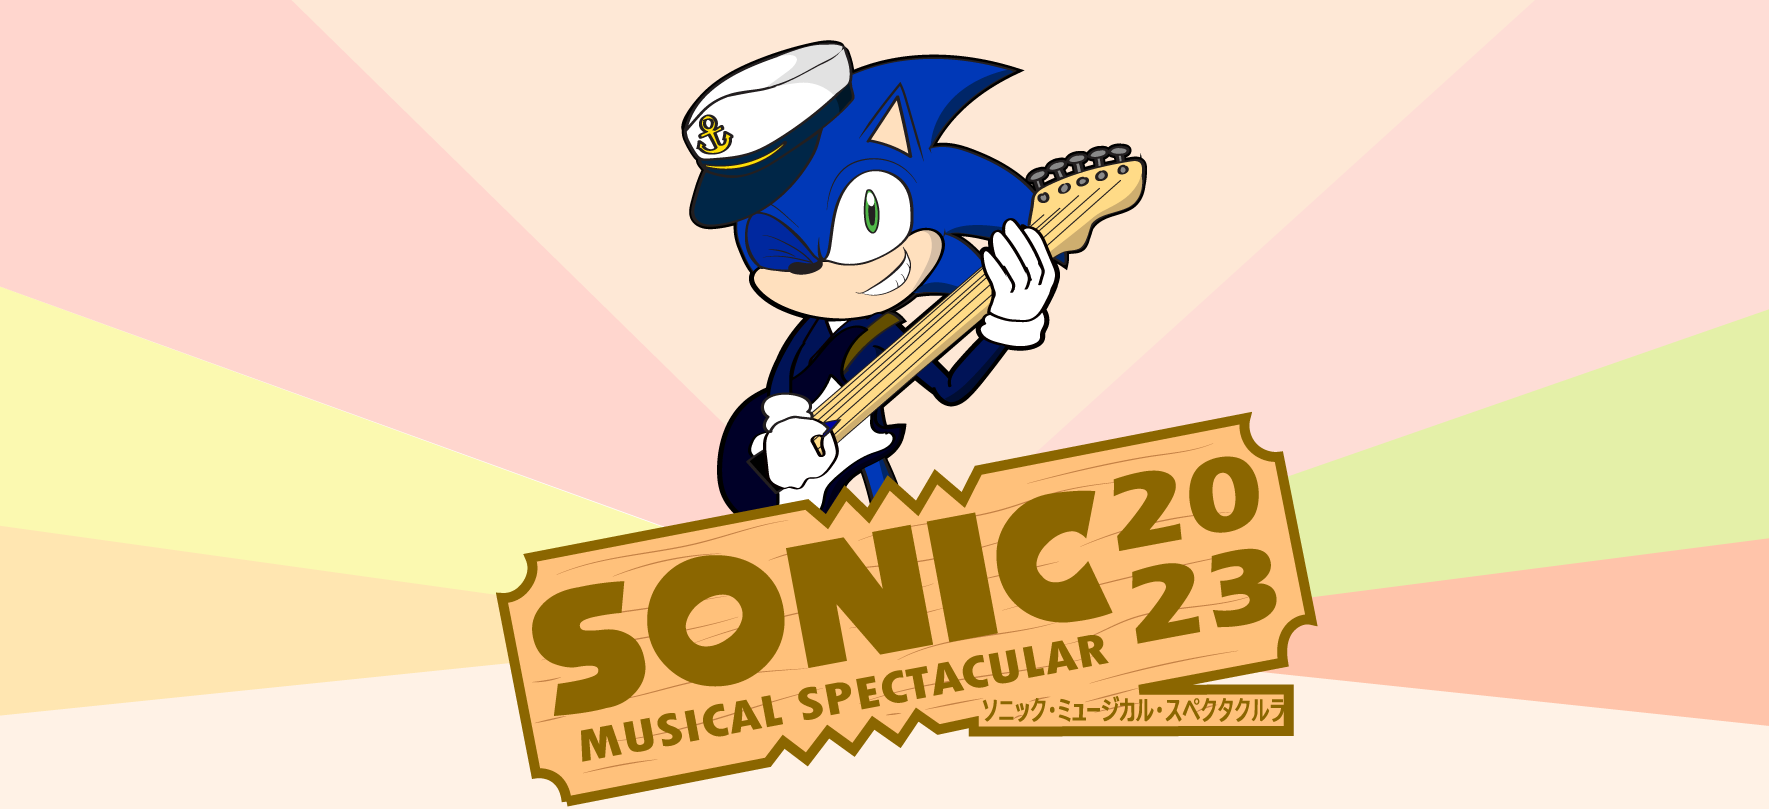 Sonic Musical Spectacular 2023 - Submit Song Requests and earn awesome rewards!